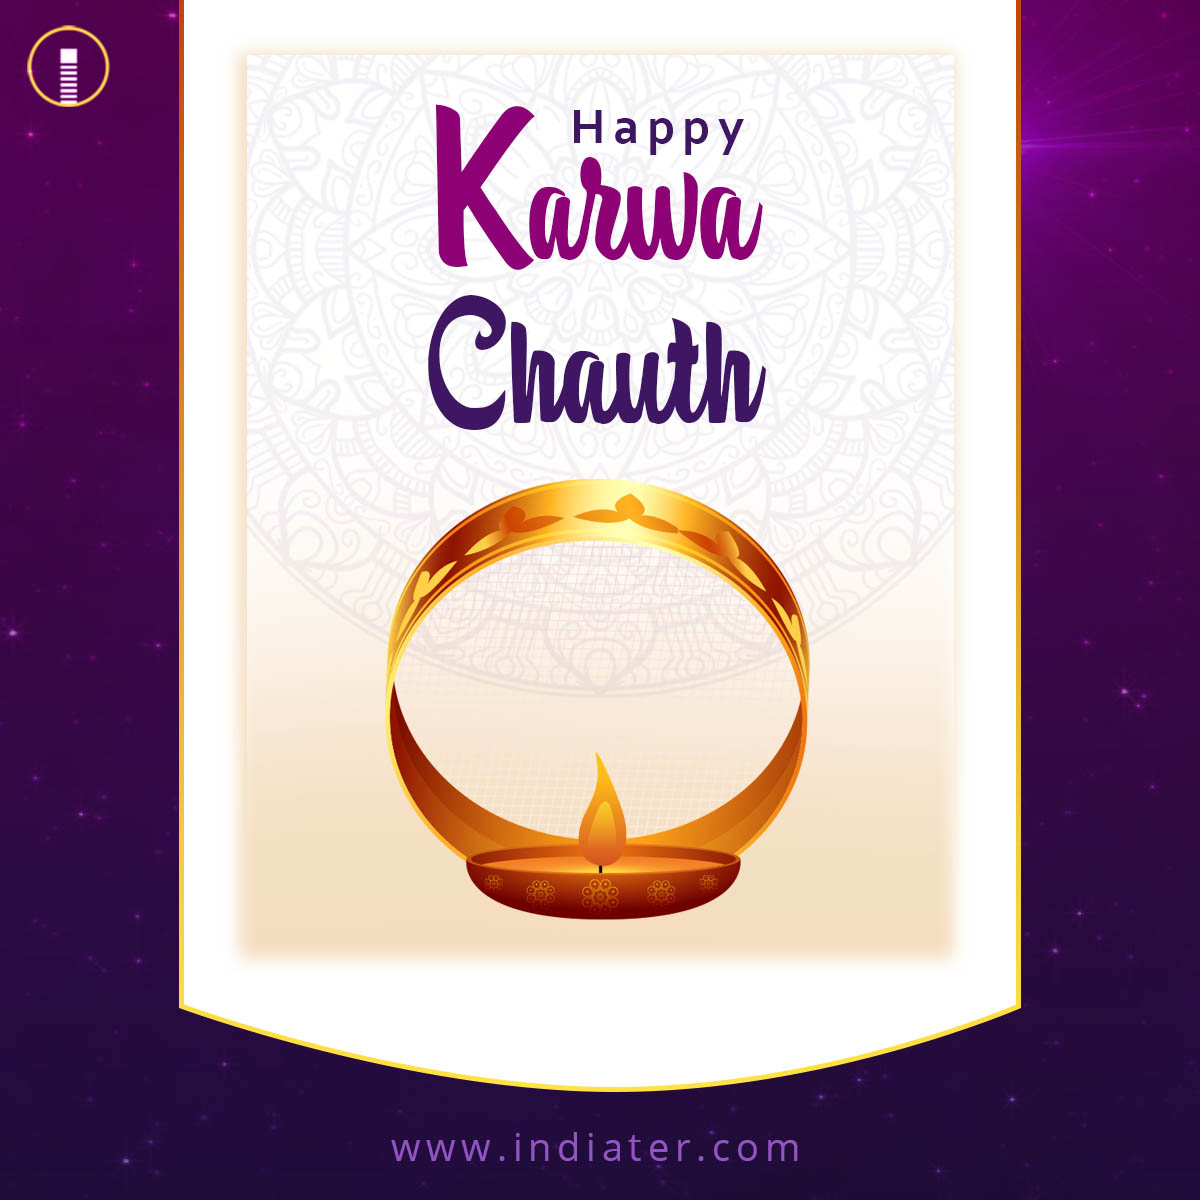 Happy karwa chauth Design image and Psd free download - Indiater